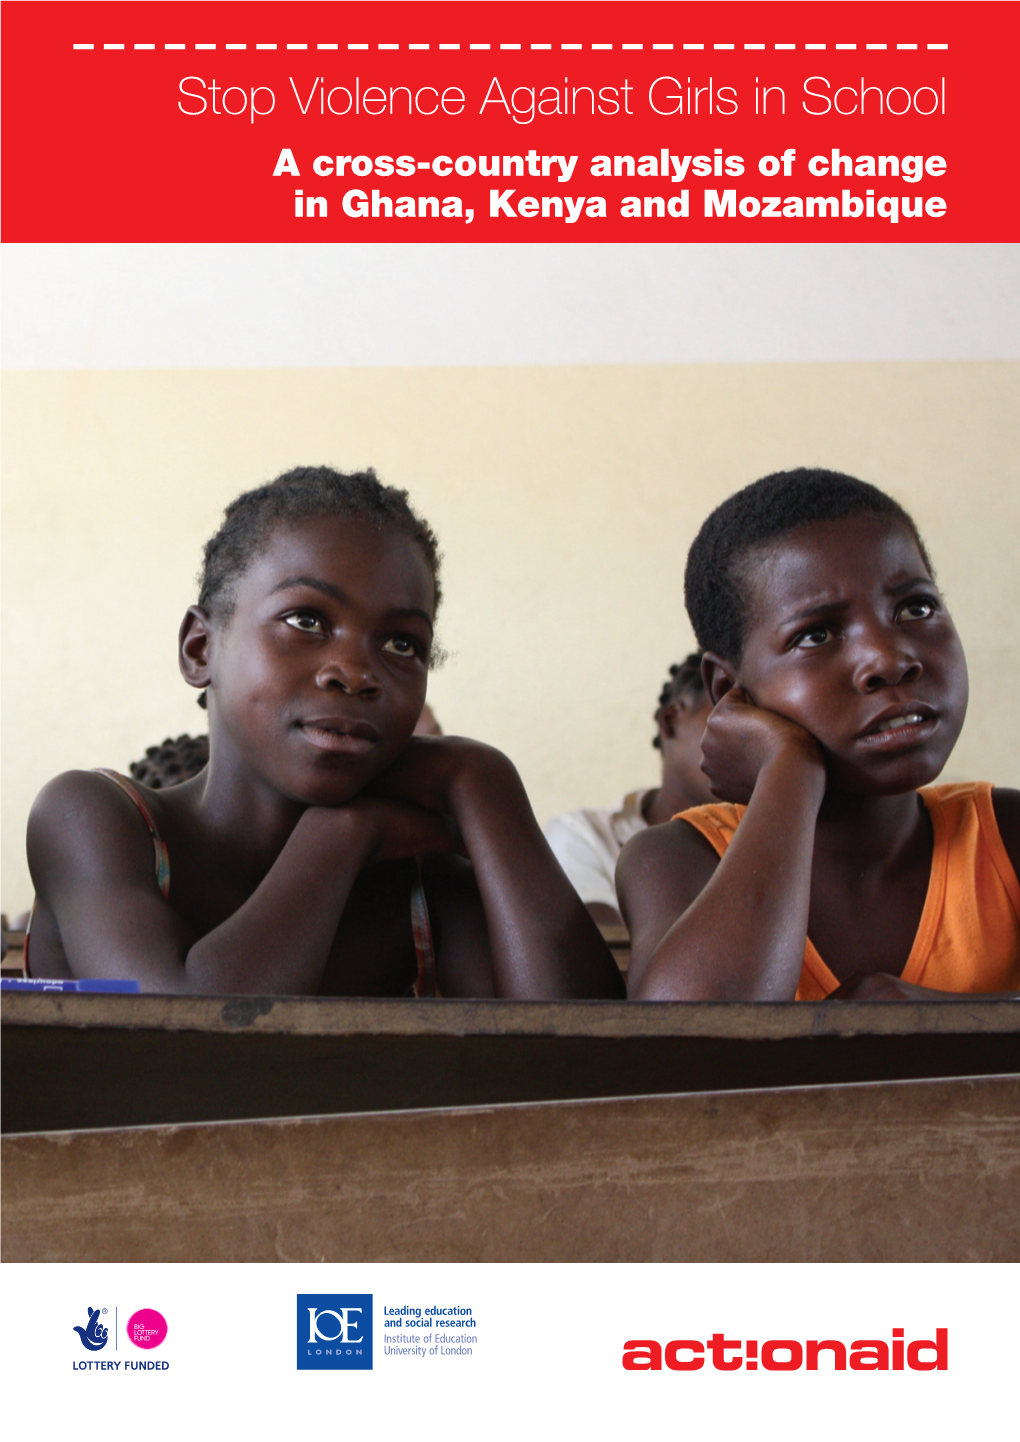 Stop Violence Against Girls in School a Cross-Country Analysis of Change in Ghana, Kenya and Mozambique